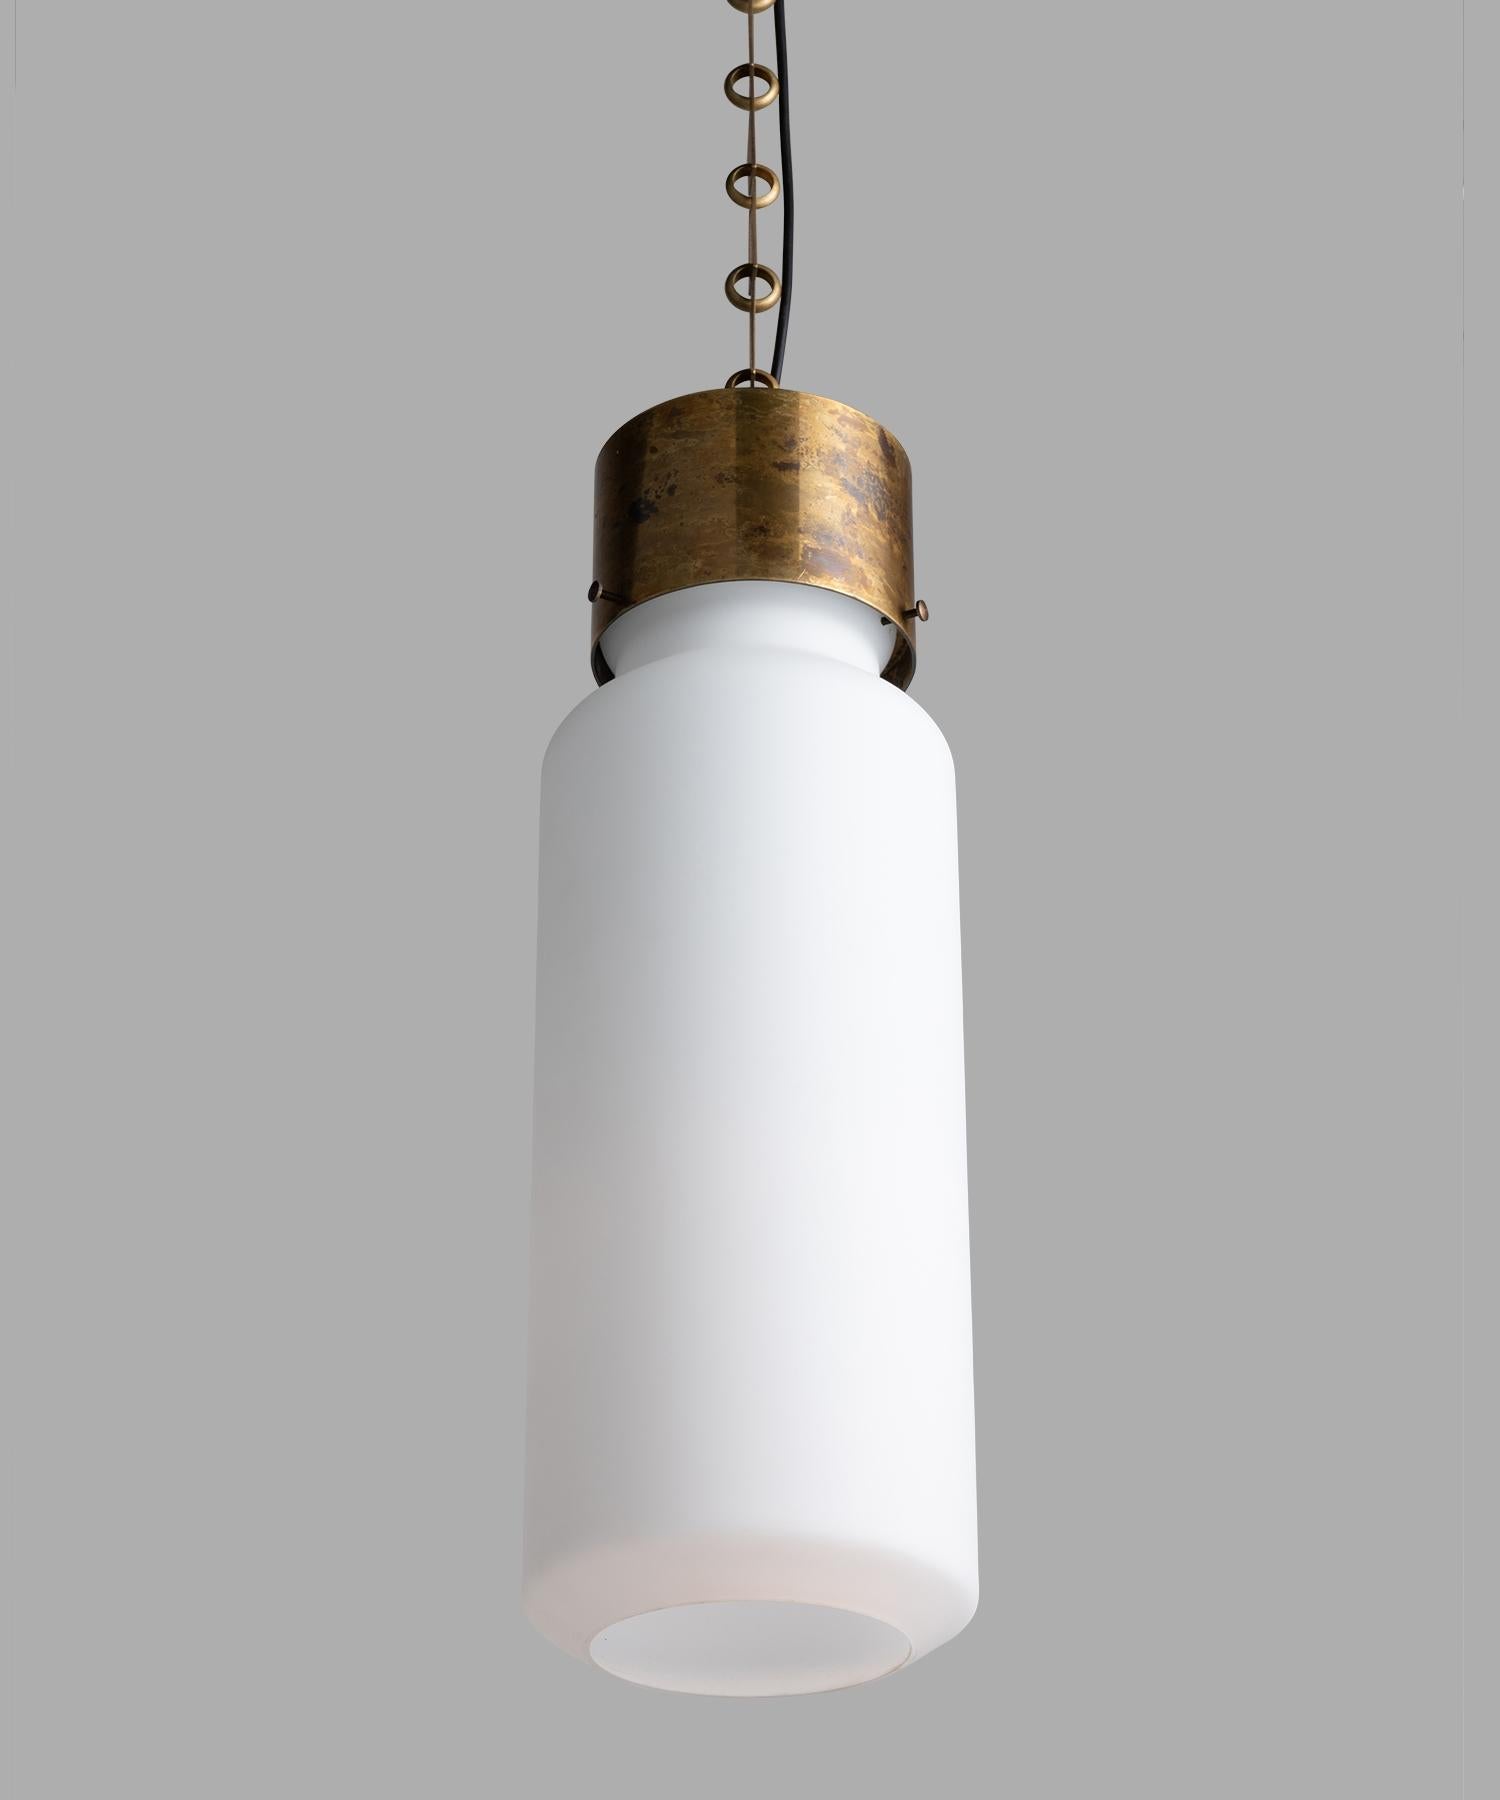 Large opaline glass shade with patinated brass fitter, chain and canopy. In the style of Azucena.

Made in Italy

*Please Note: This fixture is made to order in Italy, and comes newly wired (eu wiring). It is not UL Listed. Standard Lead Time is 4-6